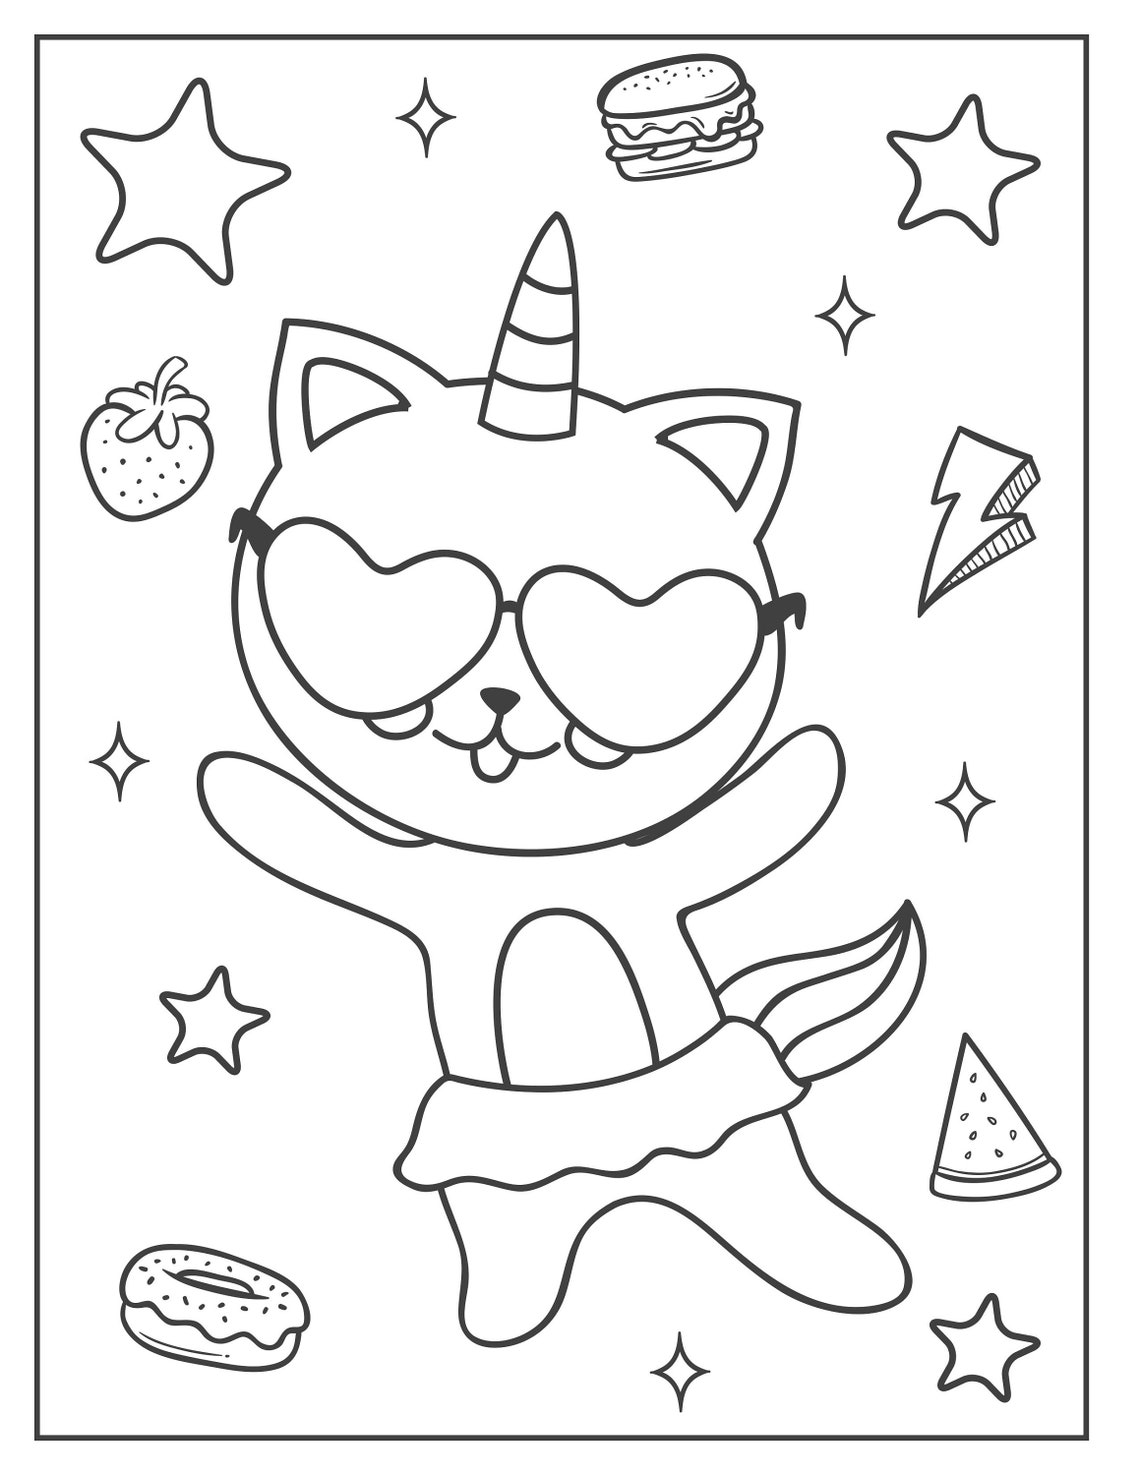 21 Printable Kitten Coloring Pages for Children - Etsy